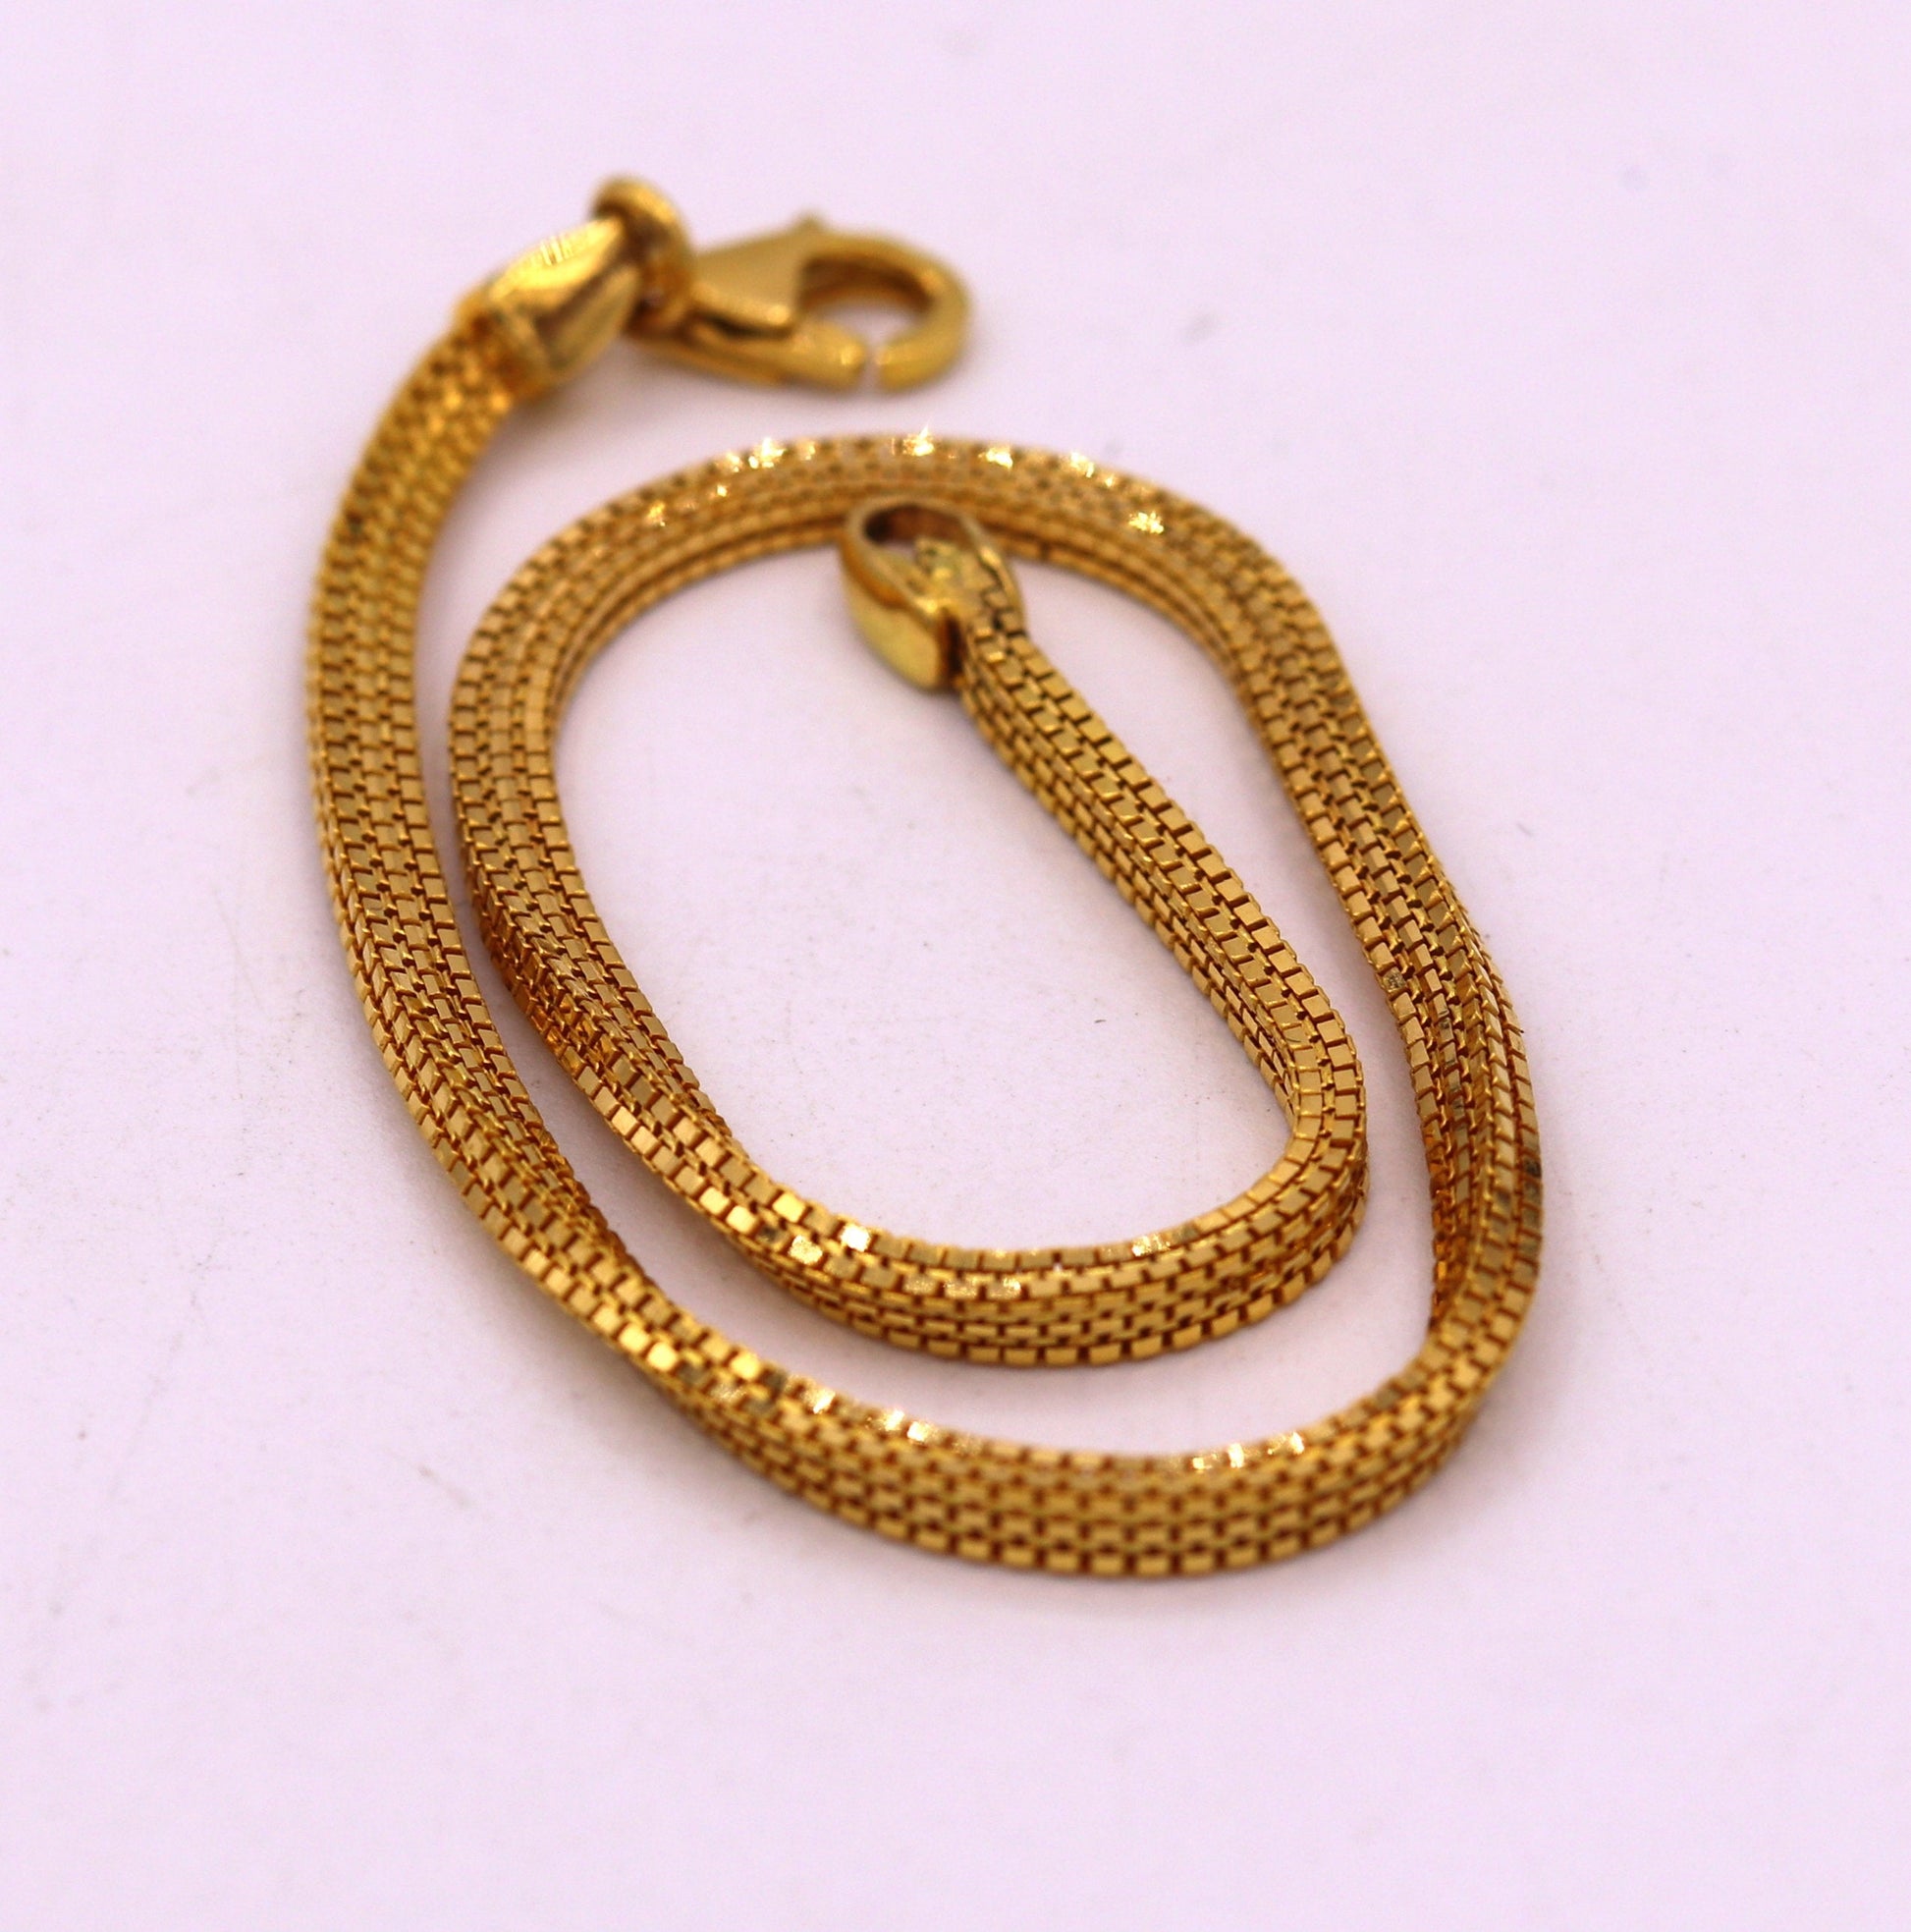 22kt yellow gold handmade highway box chain solid bracelet unisex 91.6% gold purity solid vintage jewelry from rajasthan india - TRIBAL ORNAMENTS